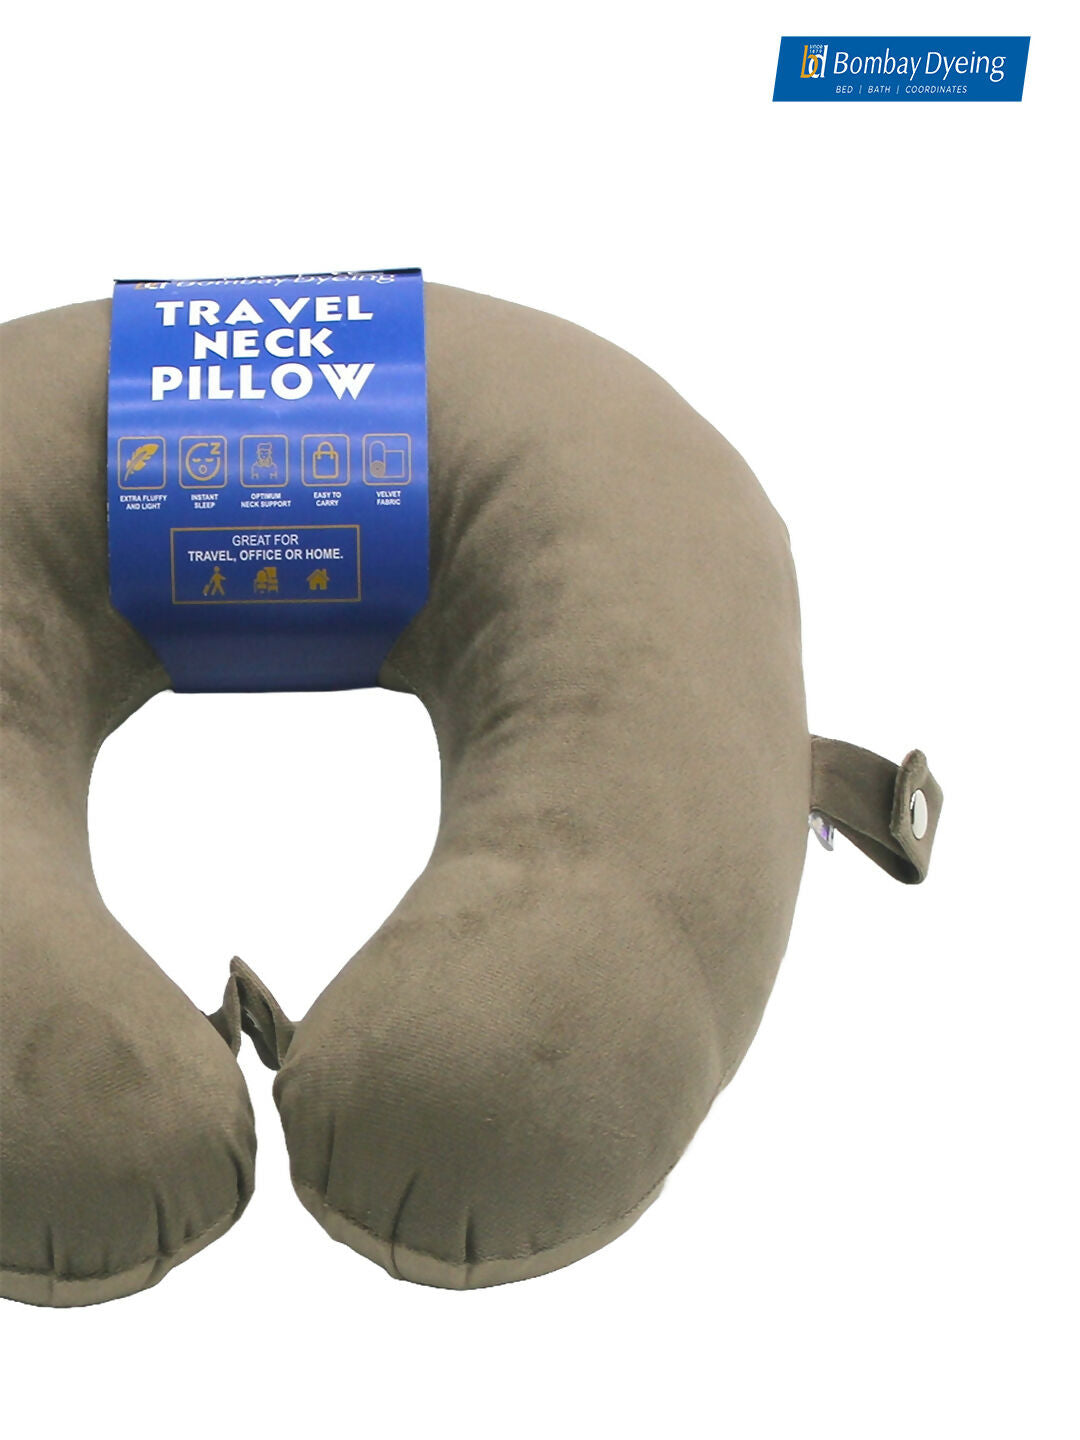 100% Polyester Dark Brown Color Travel Neck Pillow